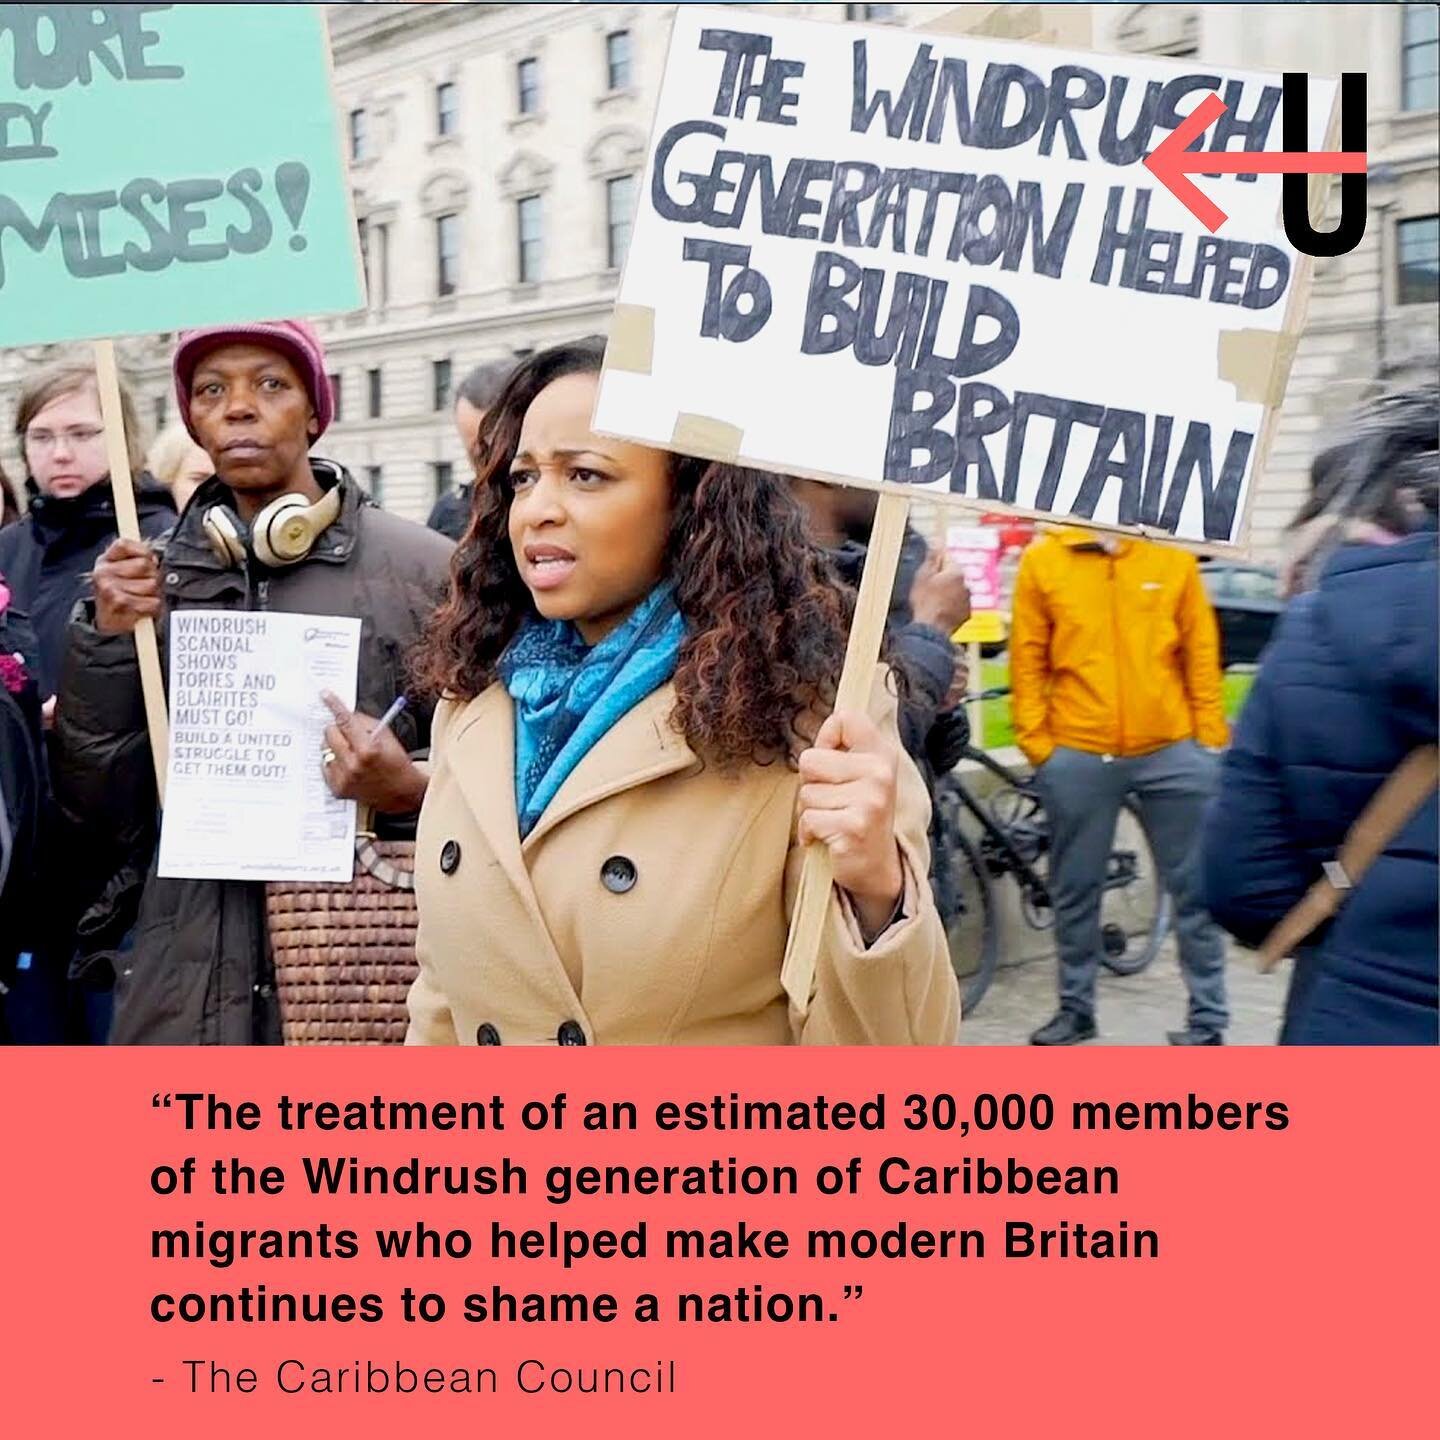 ⁣ Despite their vast physical, economic and other contributions to the UK, it's undeniable that the Windrush scandal and subsequent immigration policies of the Conservative government and British state have unjustly impacted those from the Windrush G